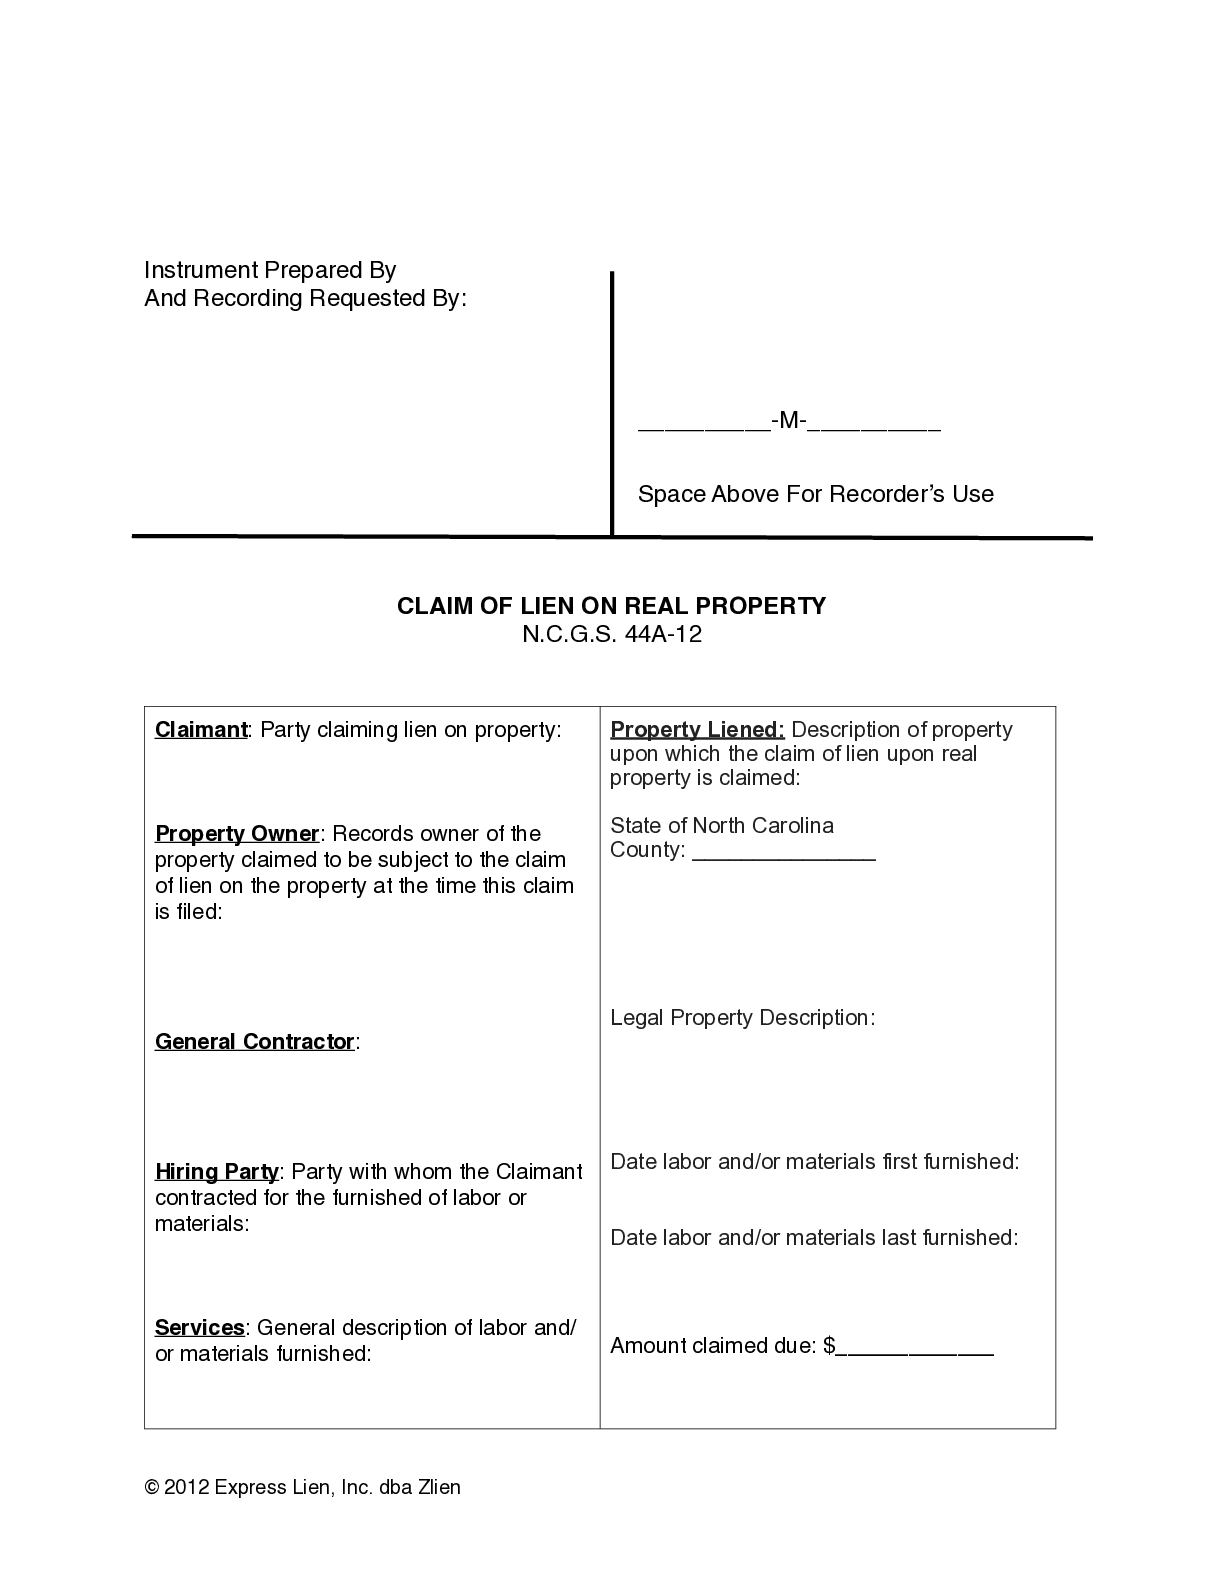 North Carolina Subcontractors Claim Of Lien On Real Property Form